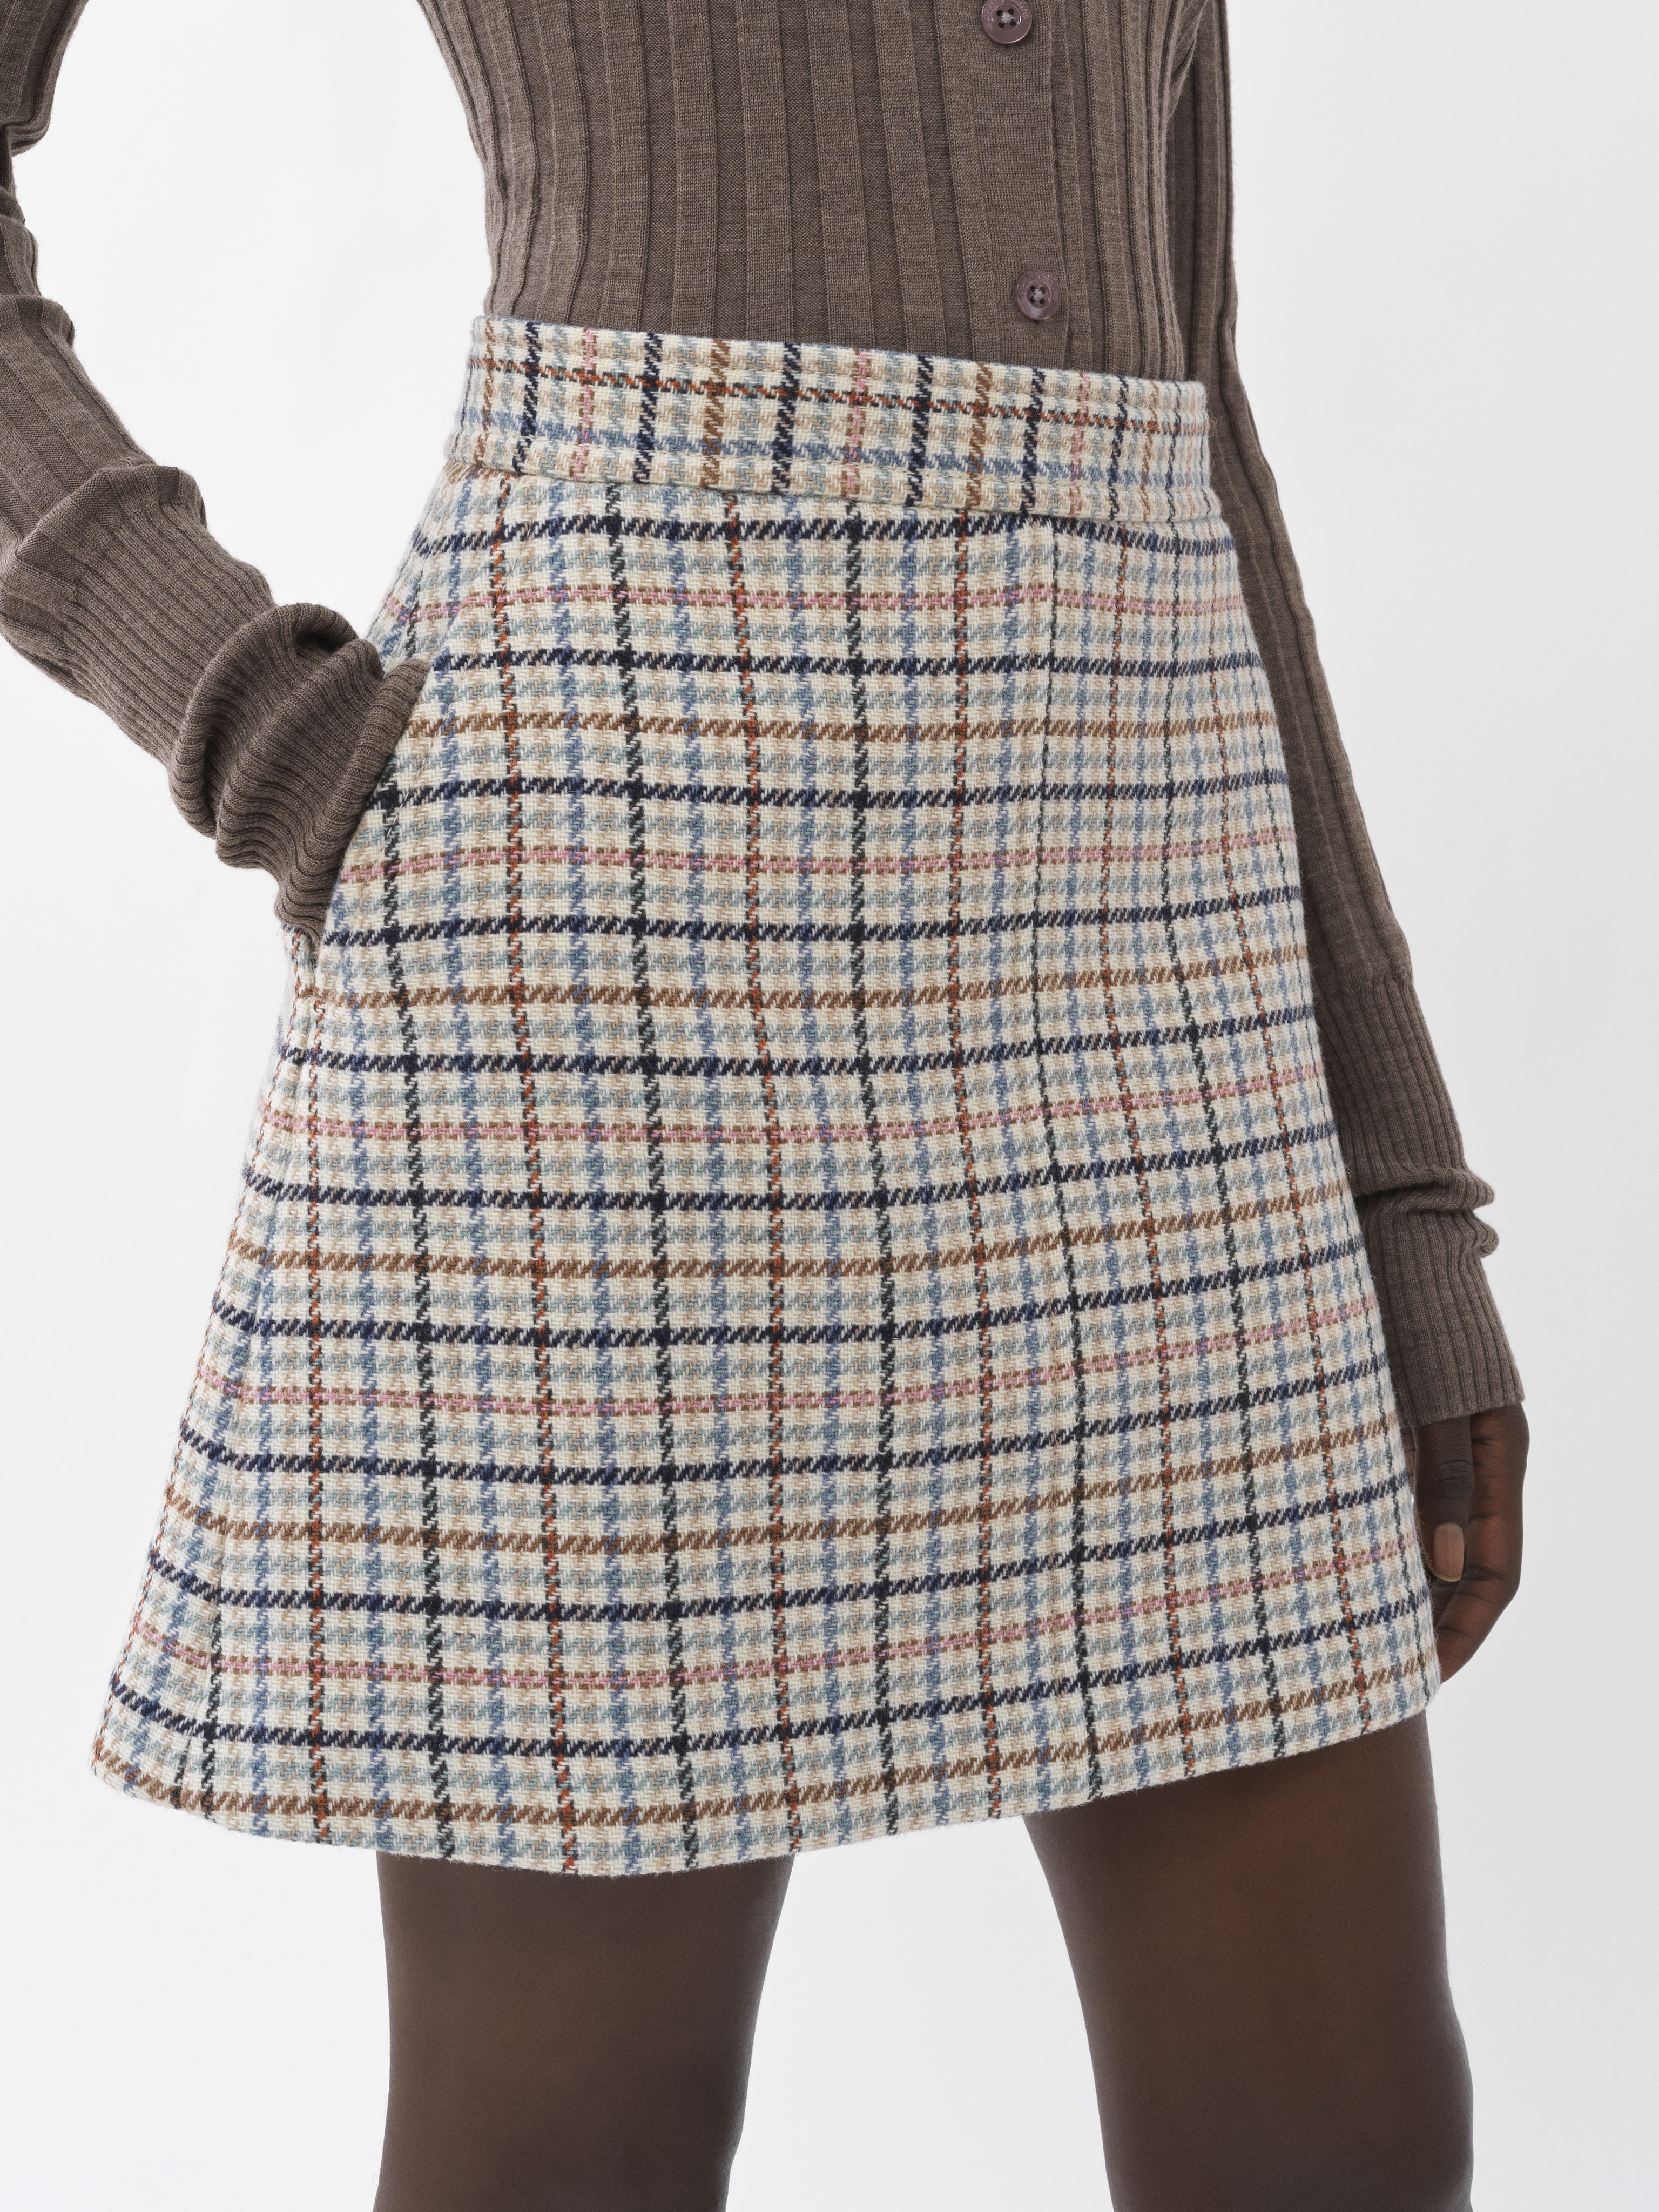 SEE BY CHLOÉ CHECKED SKIRT WHITE SIZE 8 71% WOOL, 16% POLYAMIDE, 10% POLYESTER, 3% ACRYLIC